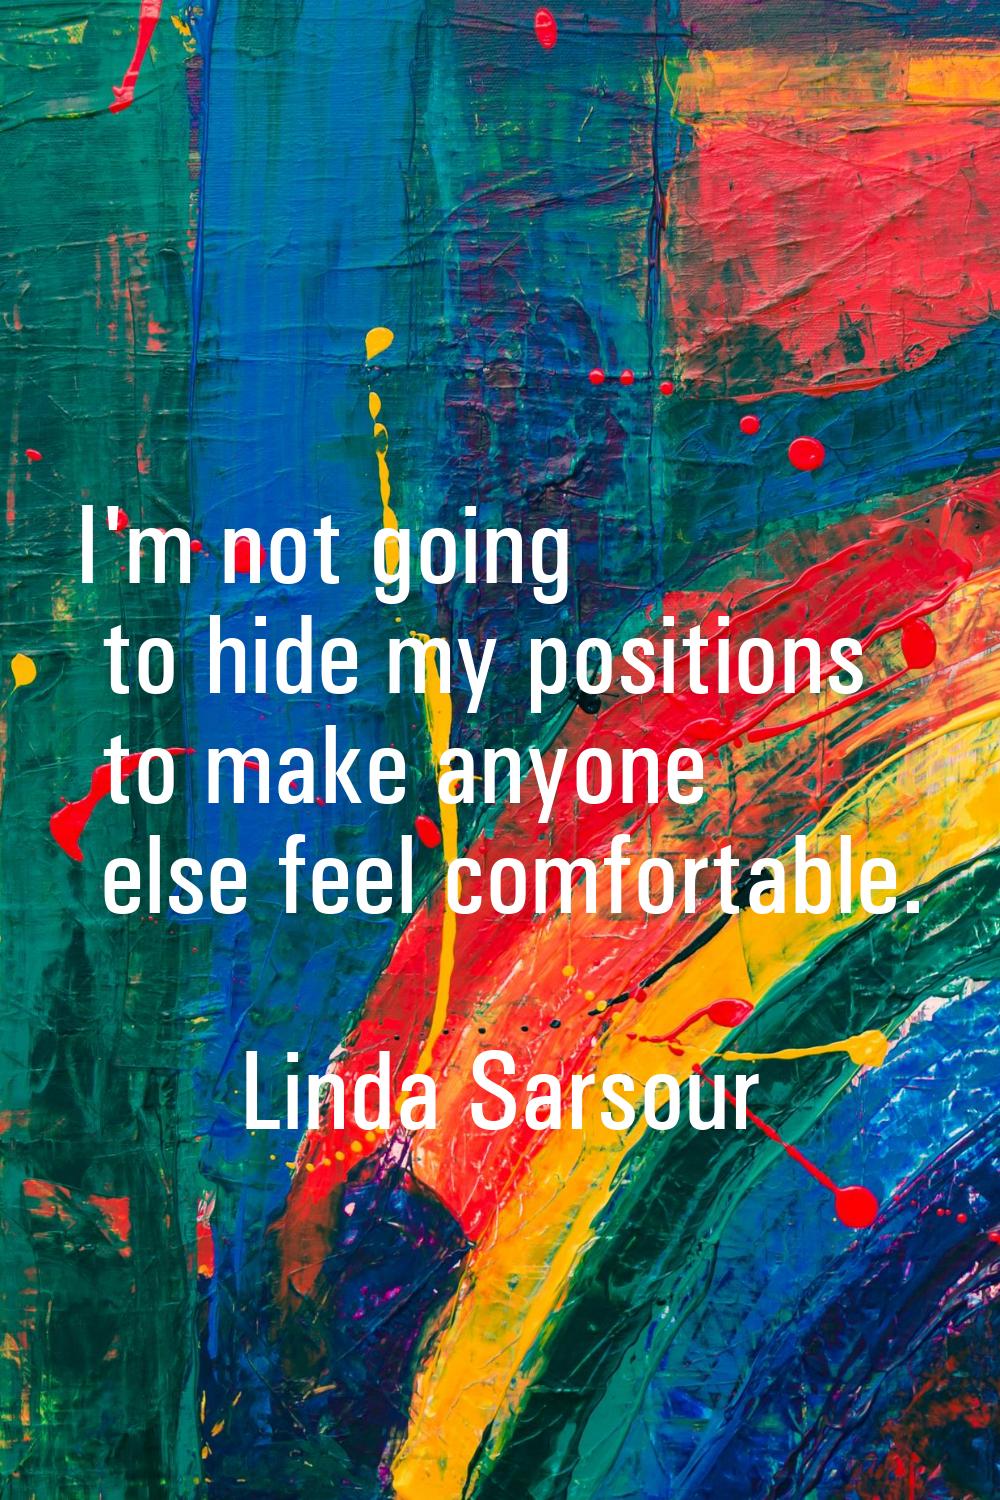 I'm not going to hide my positions to make anyone else feel comfortable.